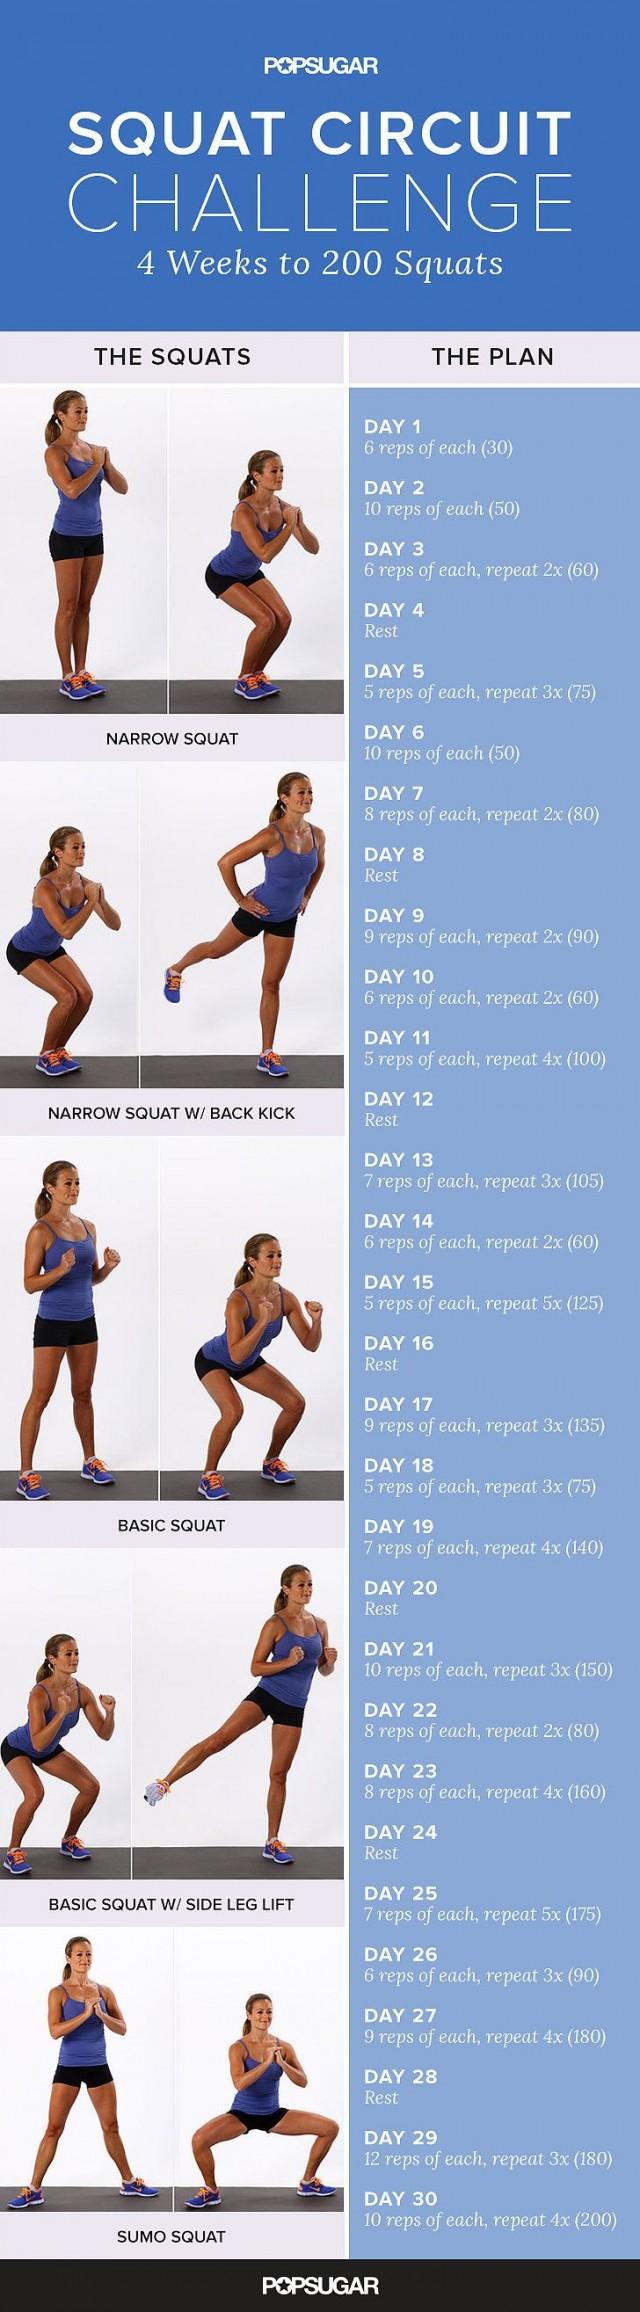 wedding photo - This Challenge Will Give You A Better Butt In Just 30 Days